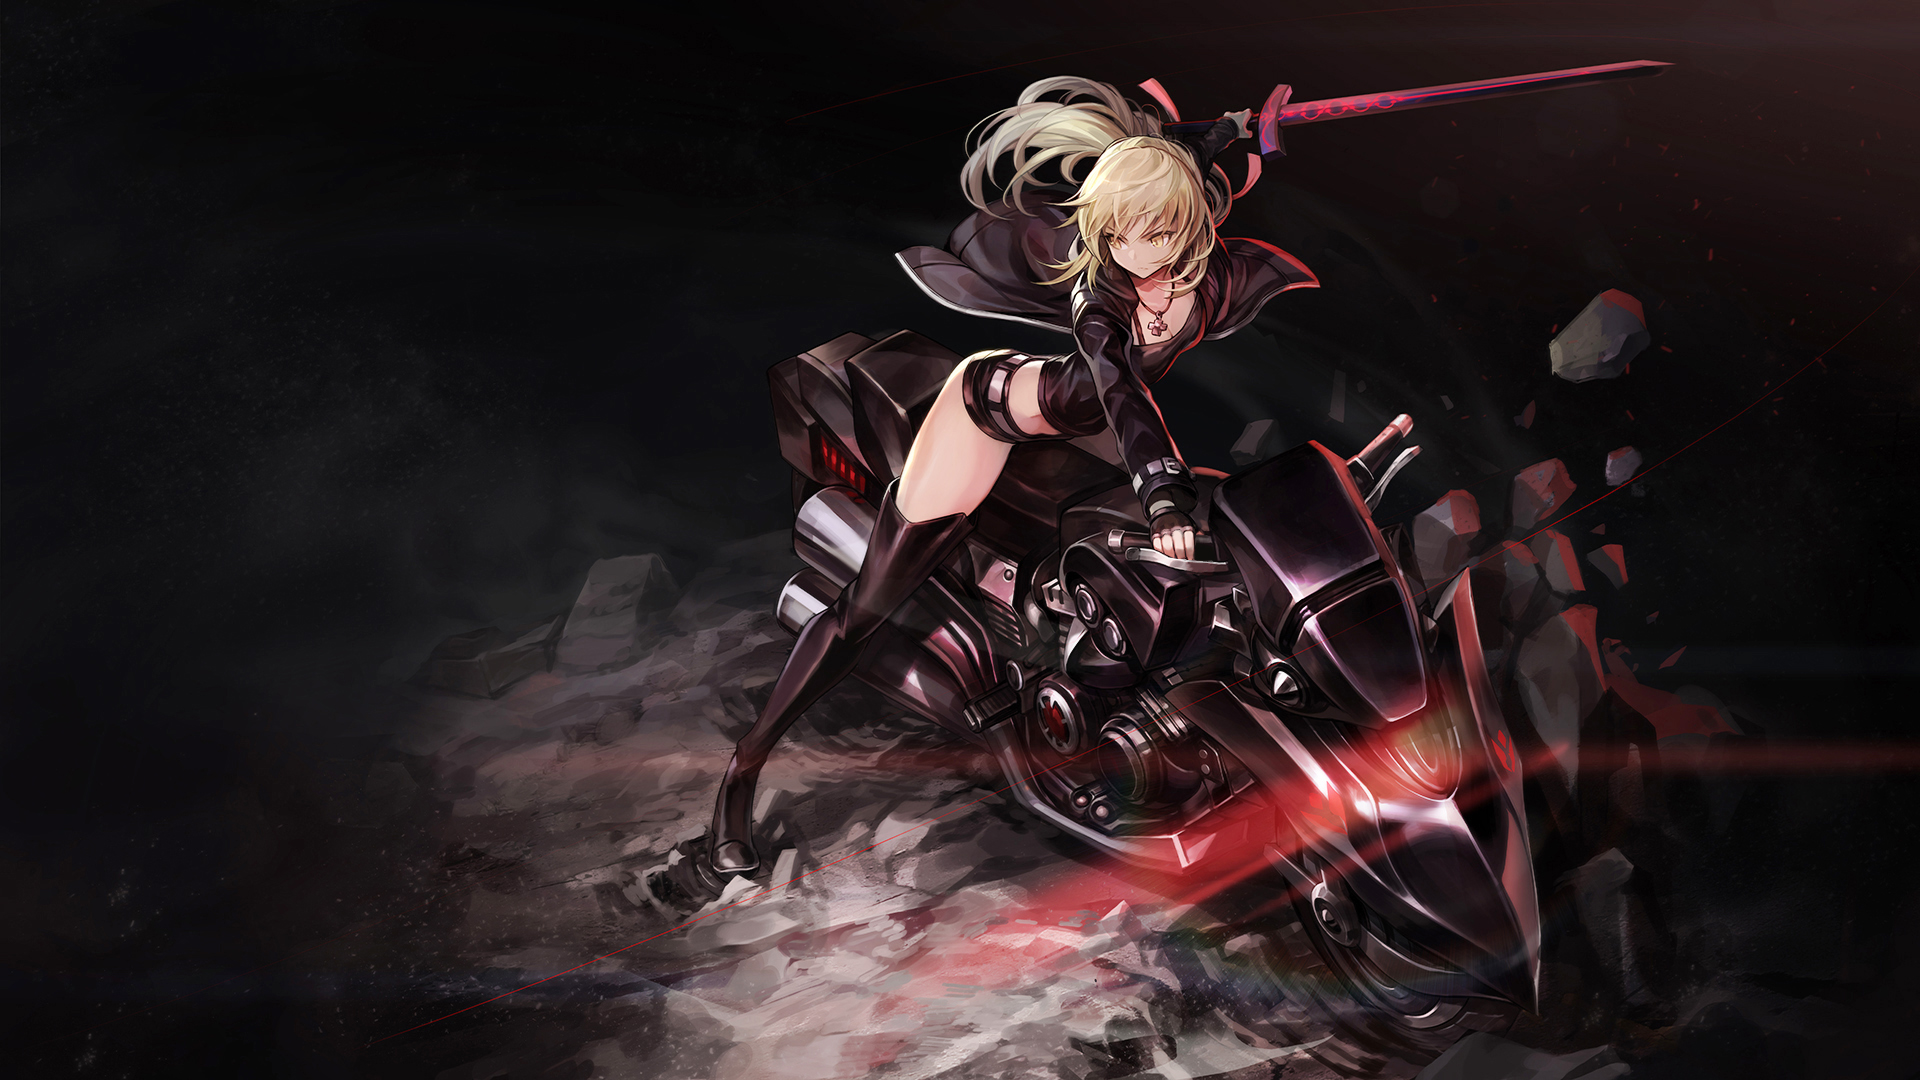 Anime 1920x1080 Fate/Grand Order Saber Alter thigh-highs gloves weapon sword motorcycle Fate series